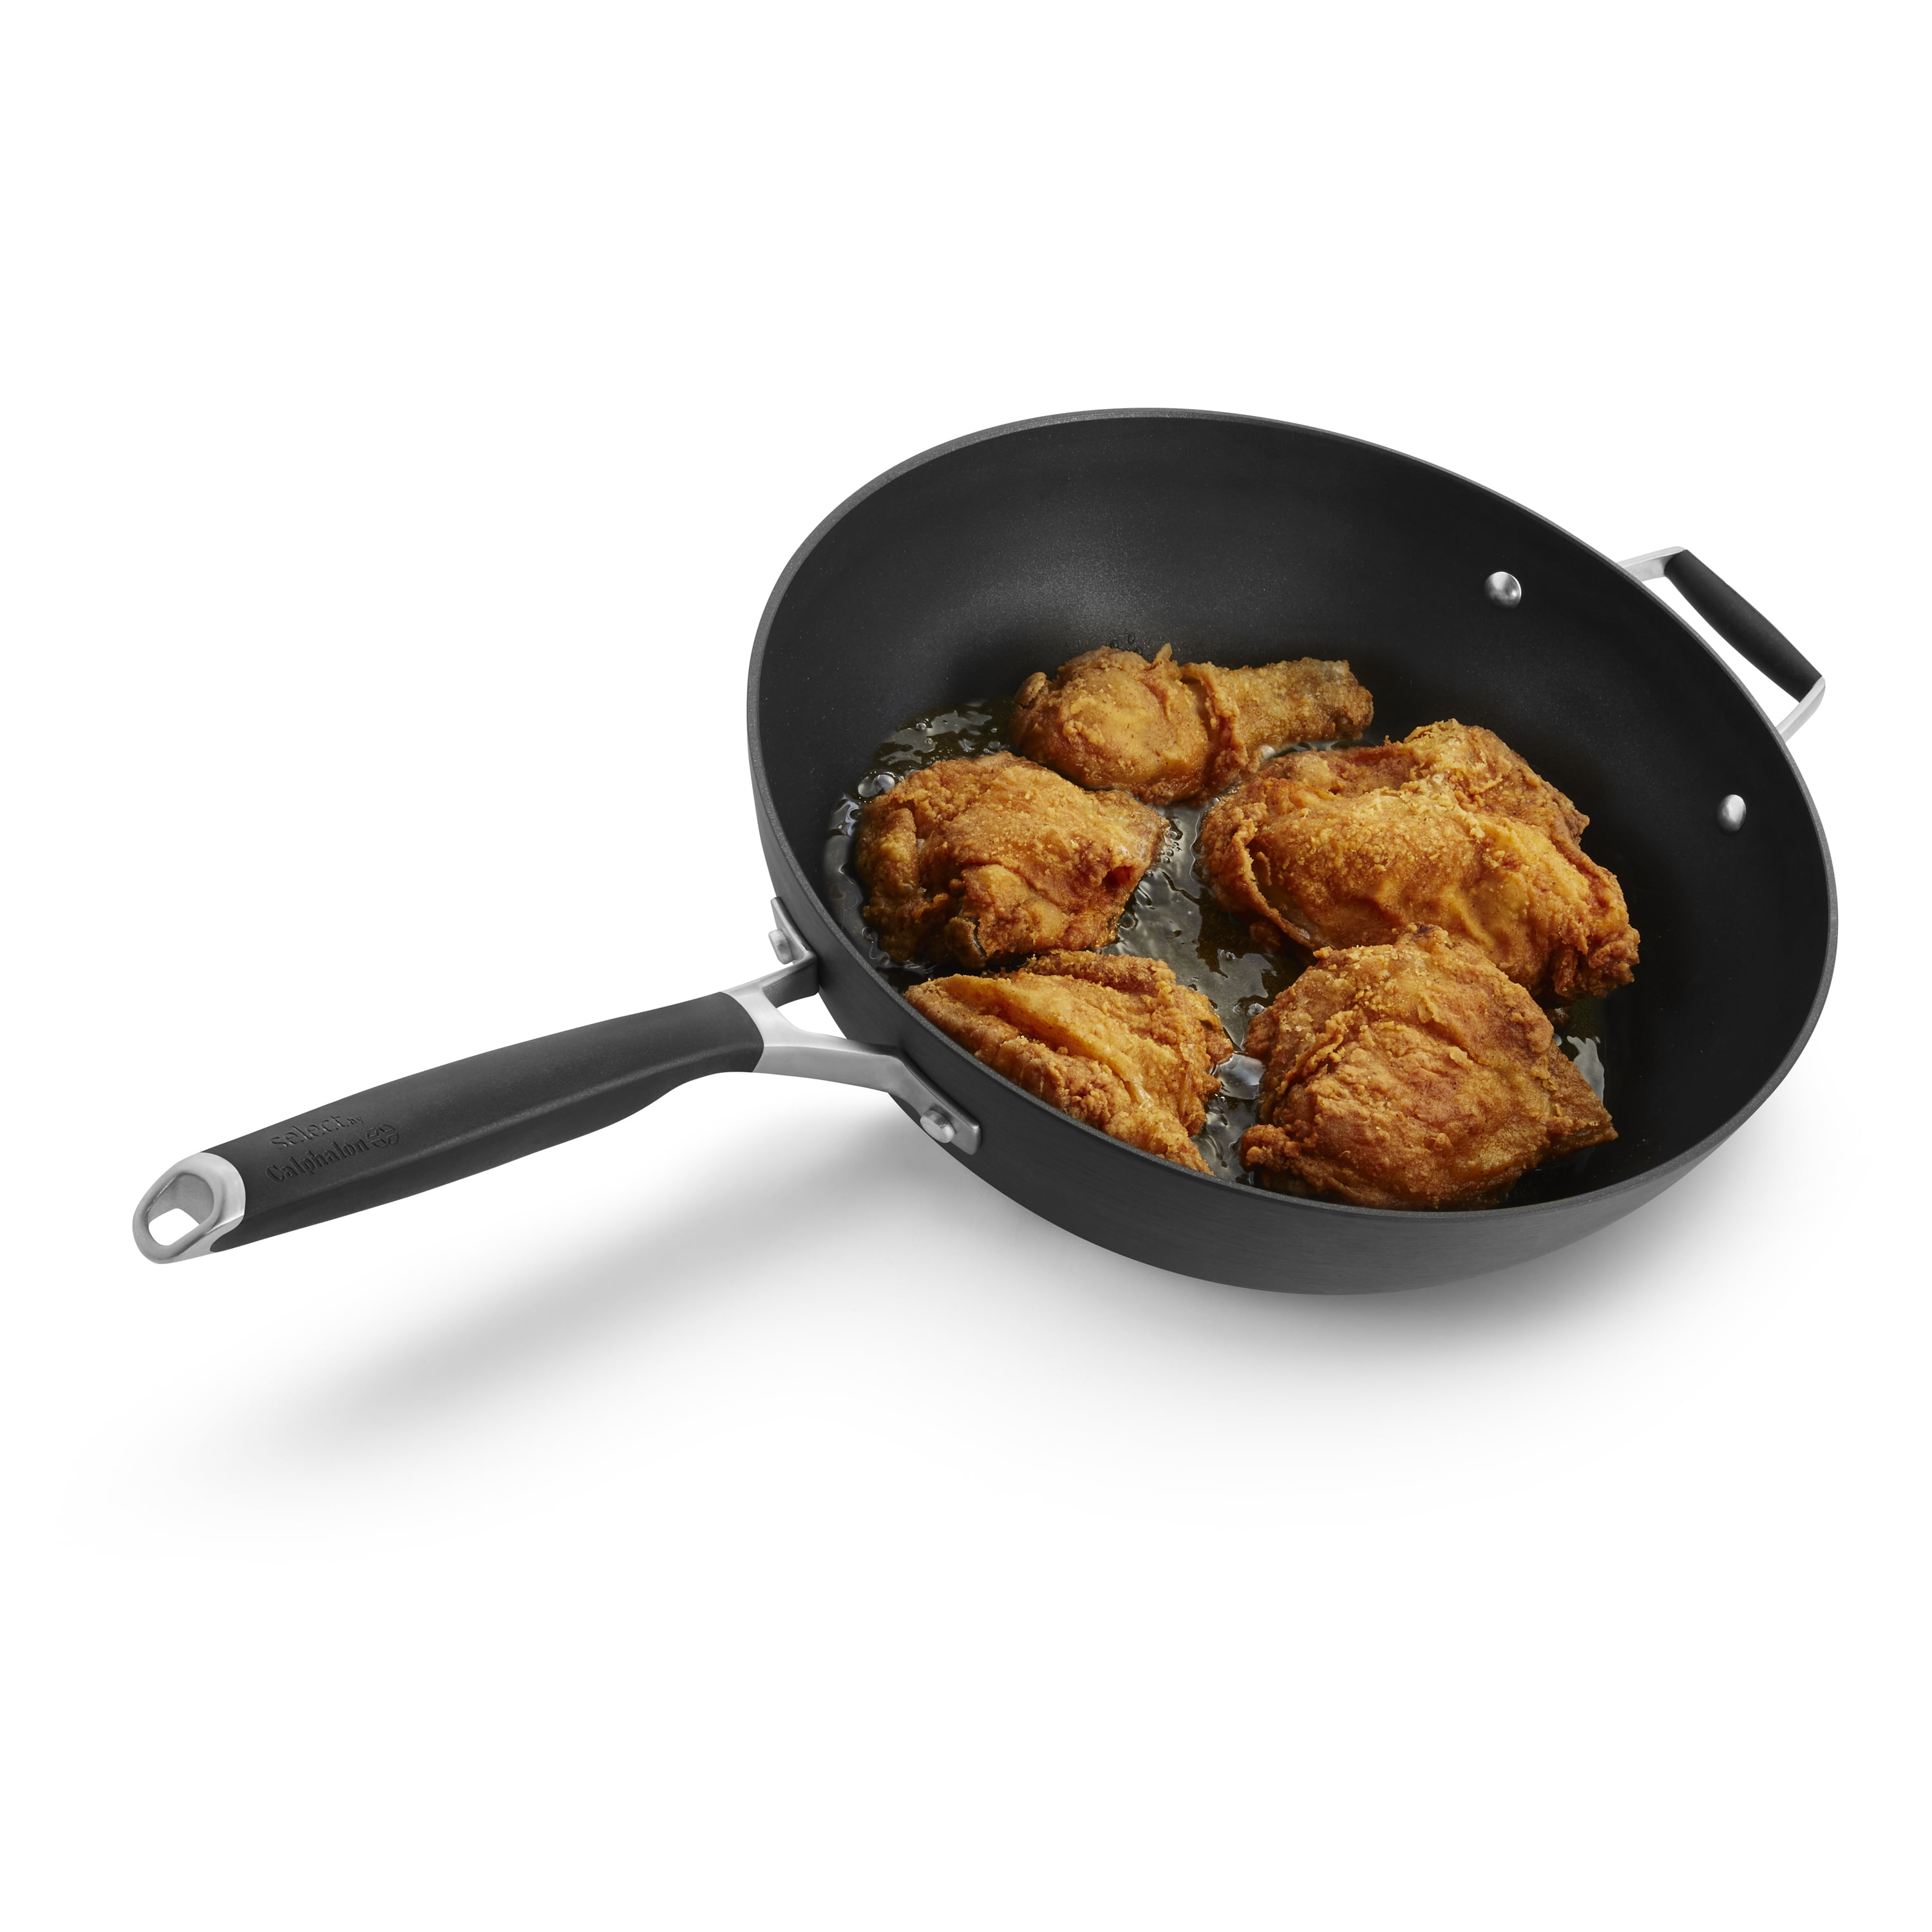 Select by Calphalon Hard-Anodized Nonstick 10-Inch Fry Pan with Cover 